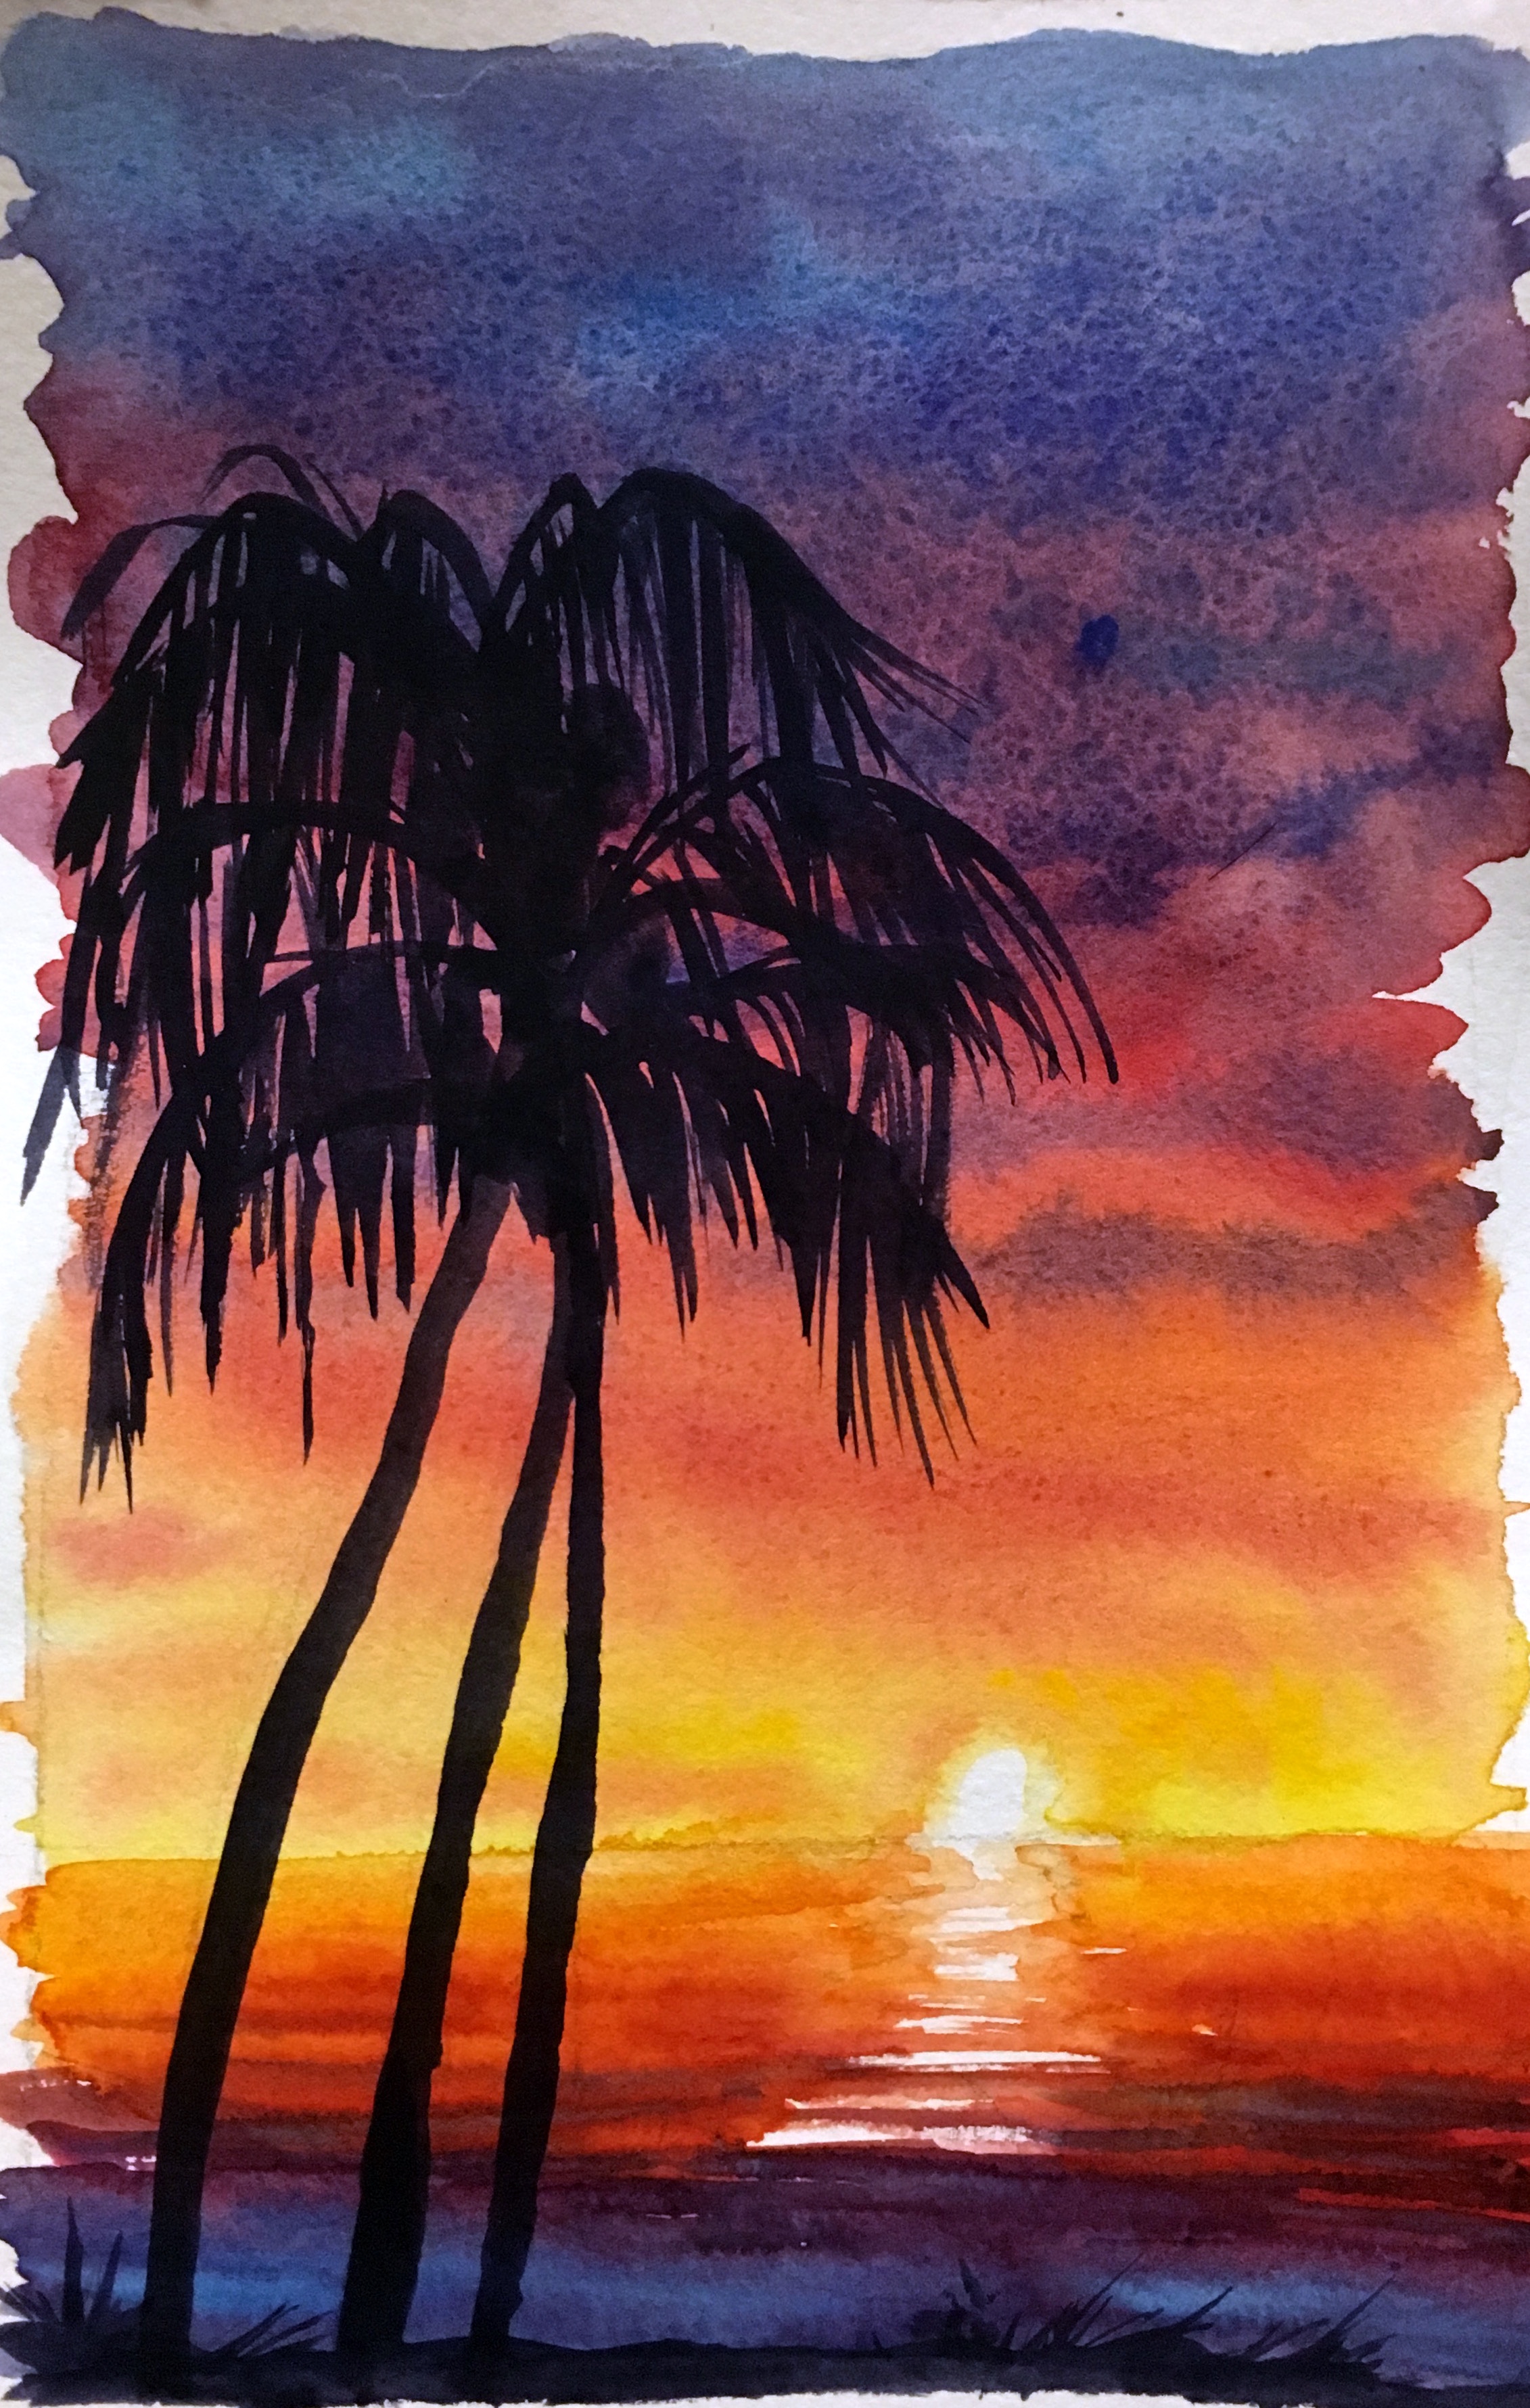 How To Watercolor Paint A Sunset Sky With Silhouettes